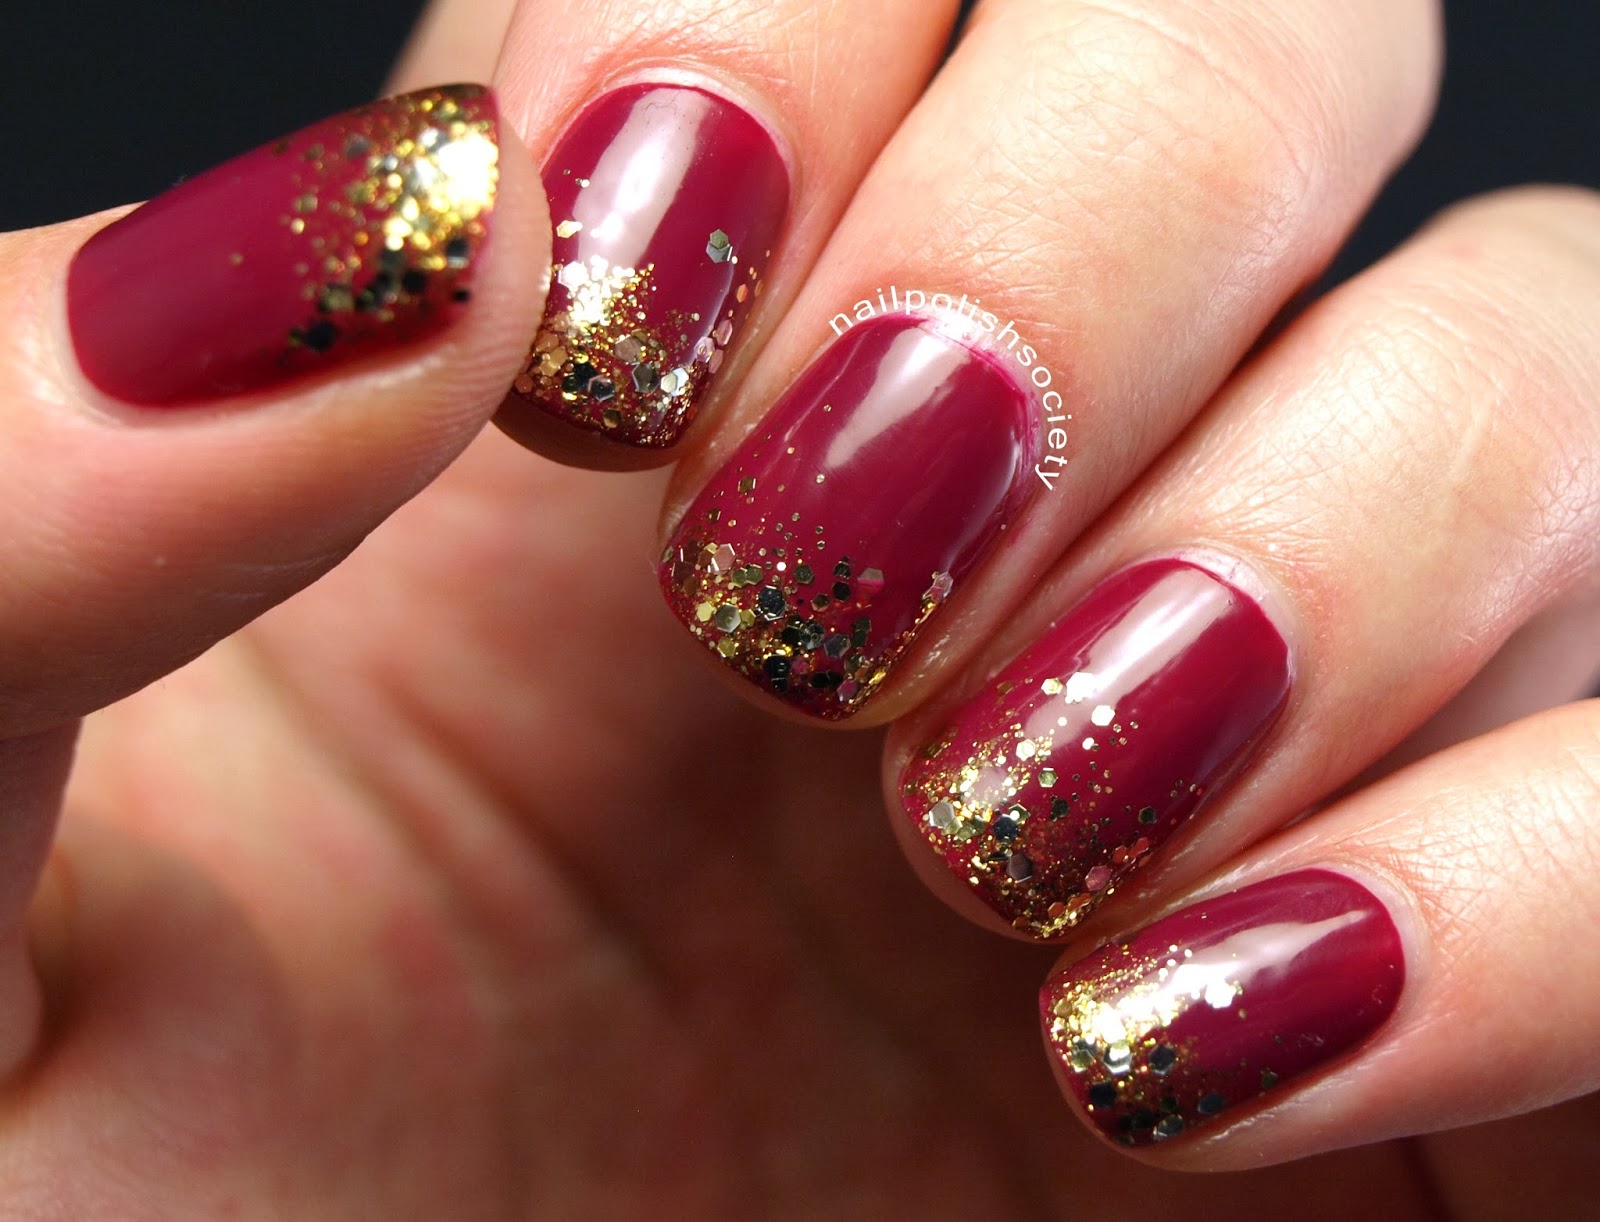 6. Colorful Holiday Nails - wide 10